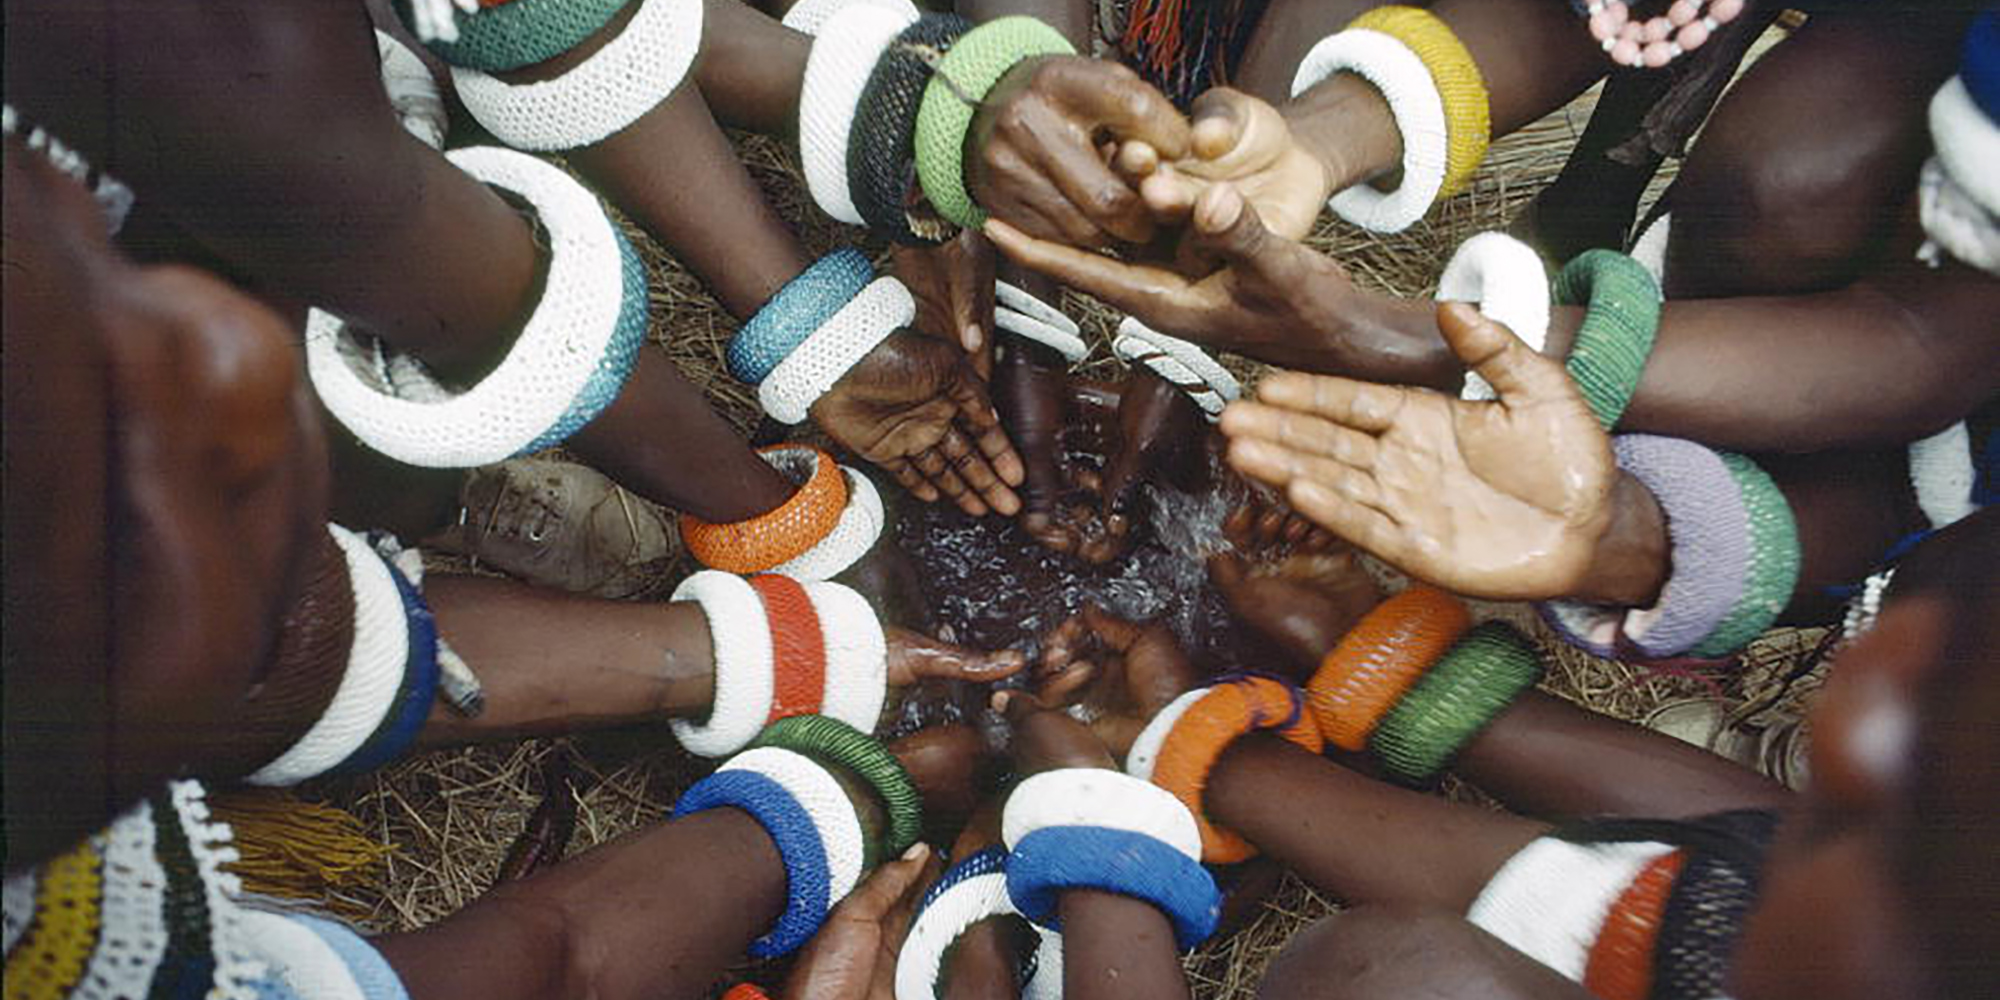 Ndebele tribe of South Africa_UN photo